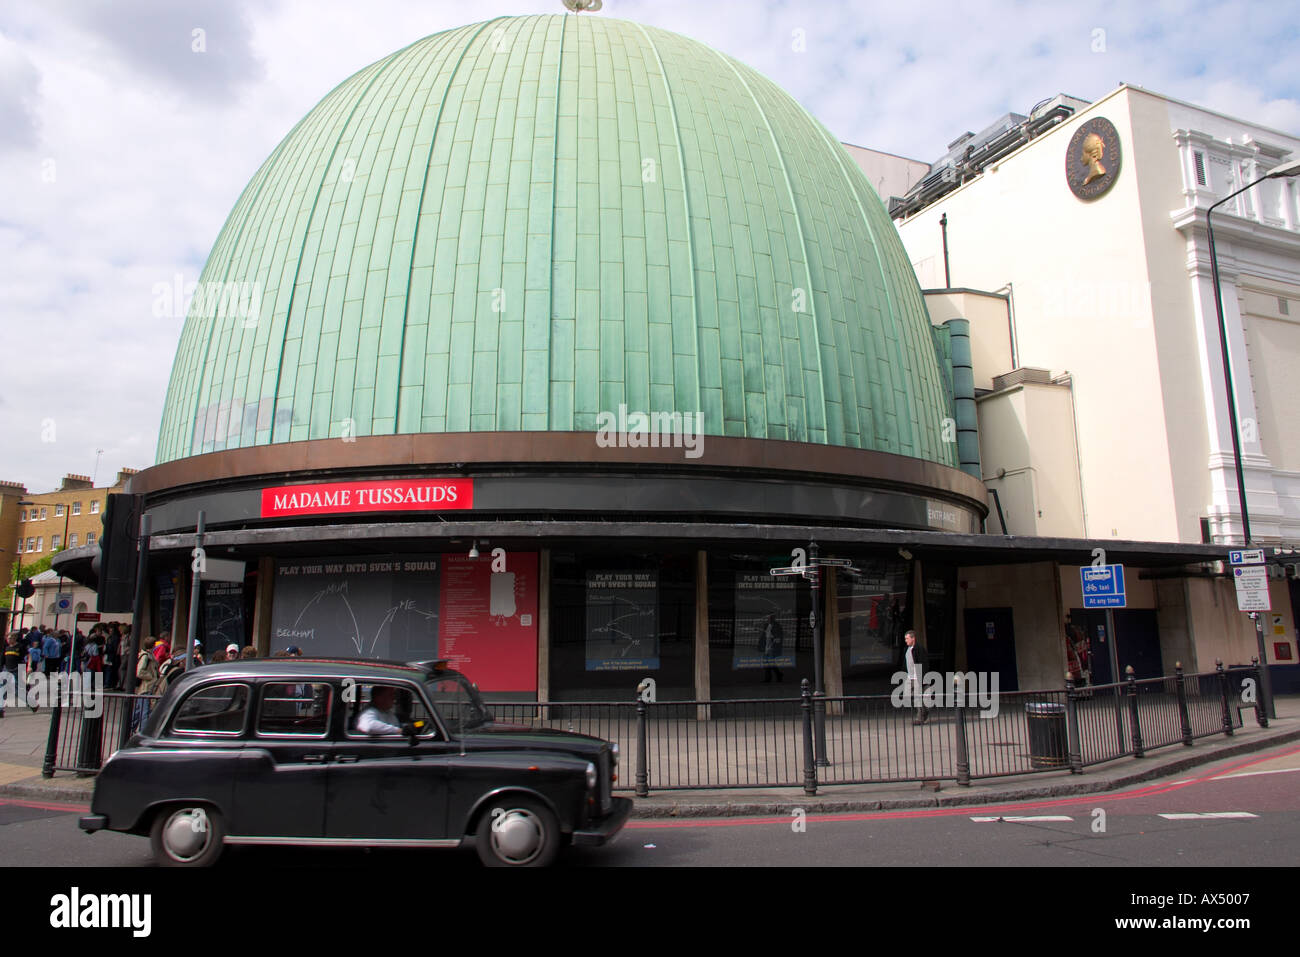 Madame Tussauds and the Planetarium in london england Stock Photo